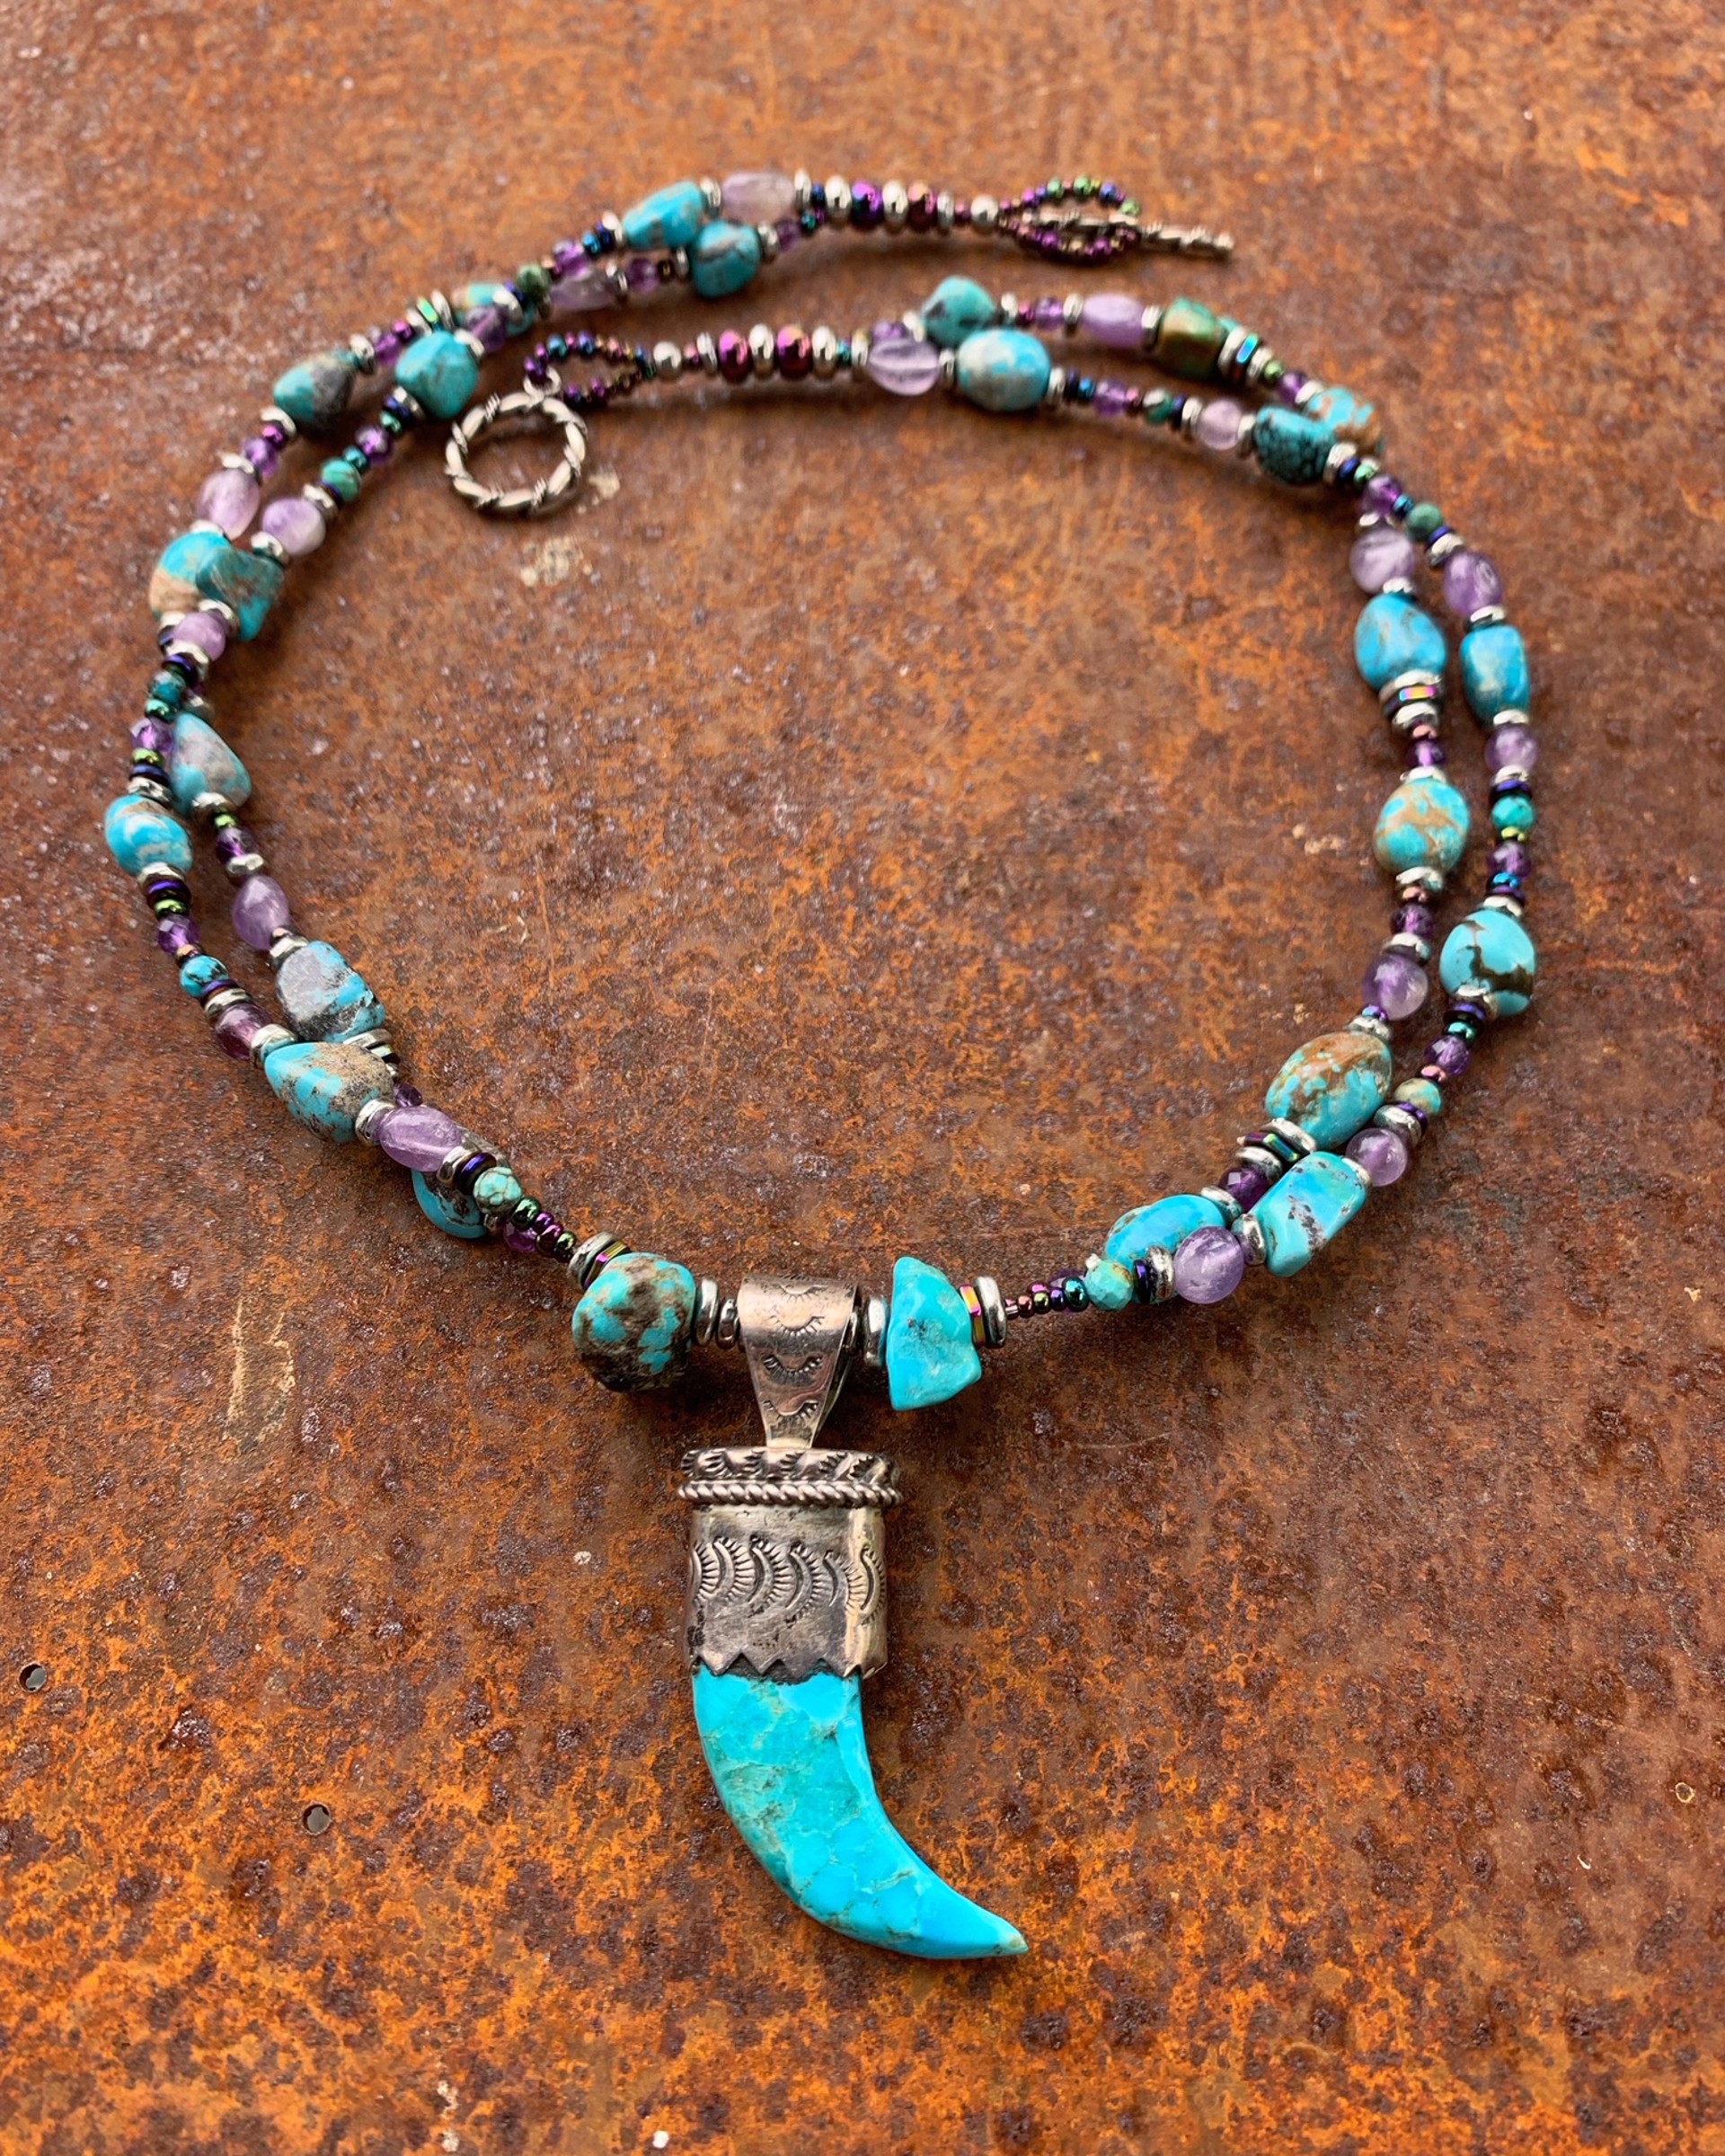 K823 Turquoise and Amethyst Bear Claw Necklace by Kelly Ormsby